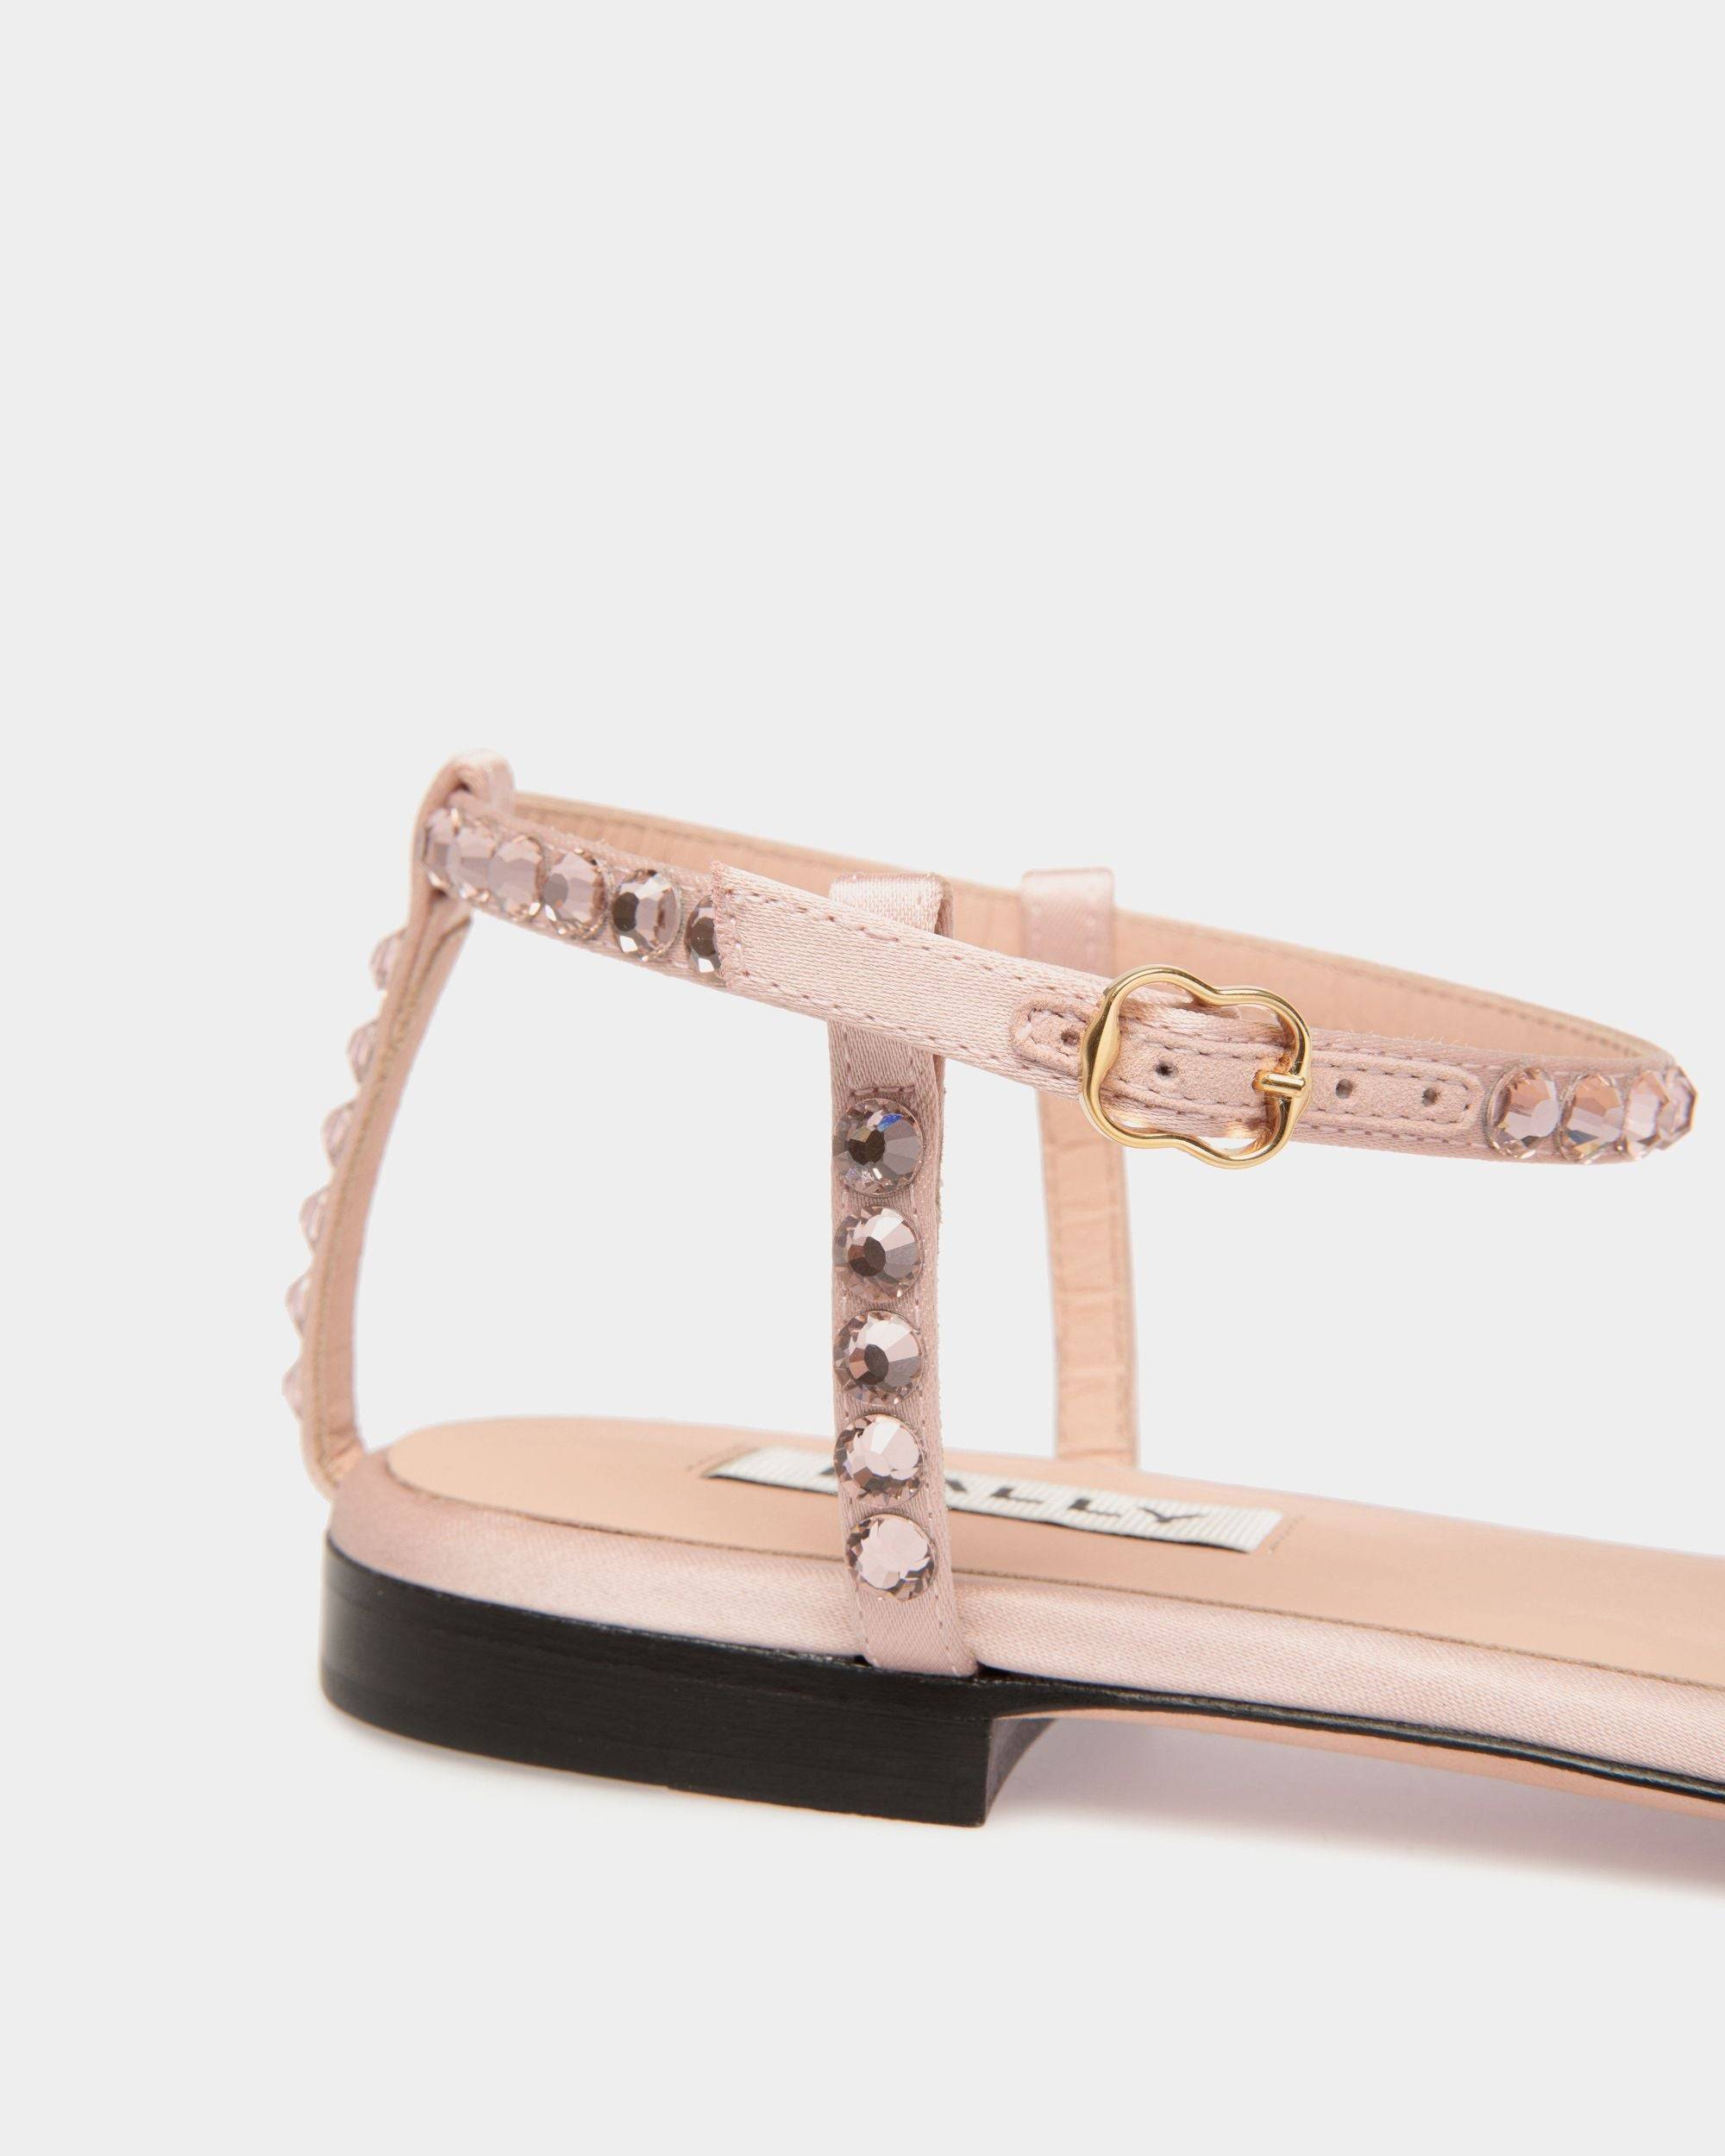 Katy Flat Sandal in Light Pink Fabric with Crystals - Women's - Bally - 04